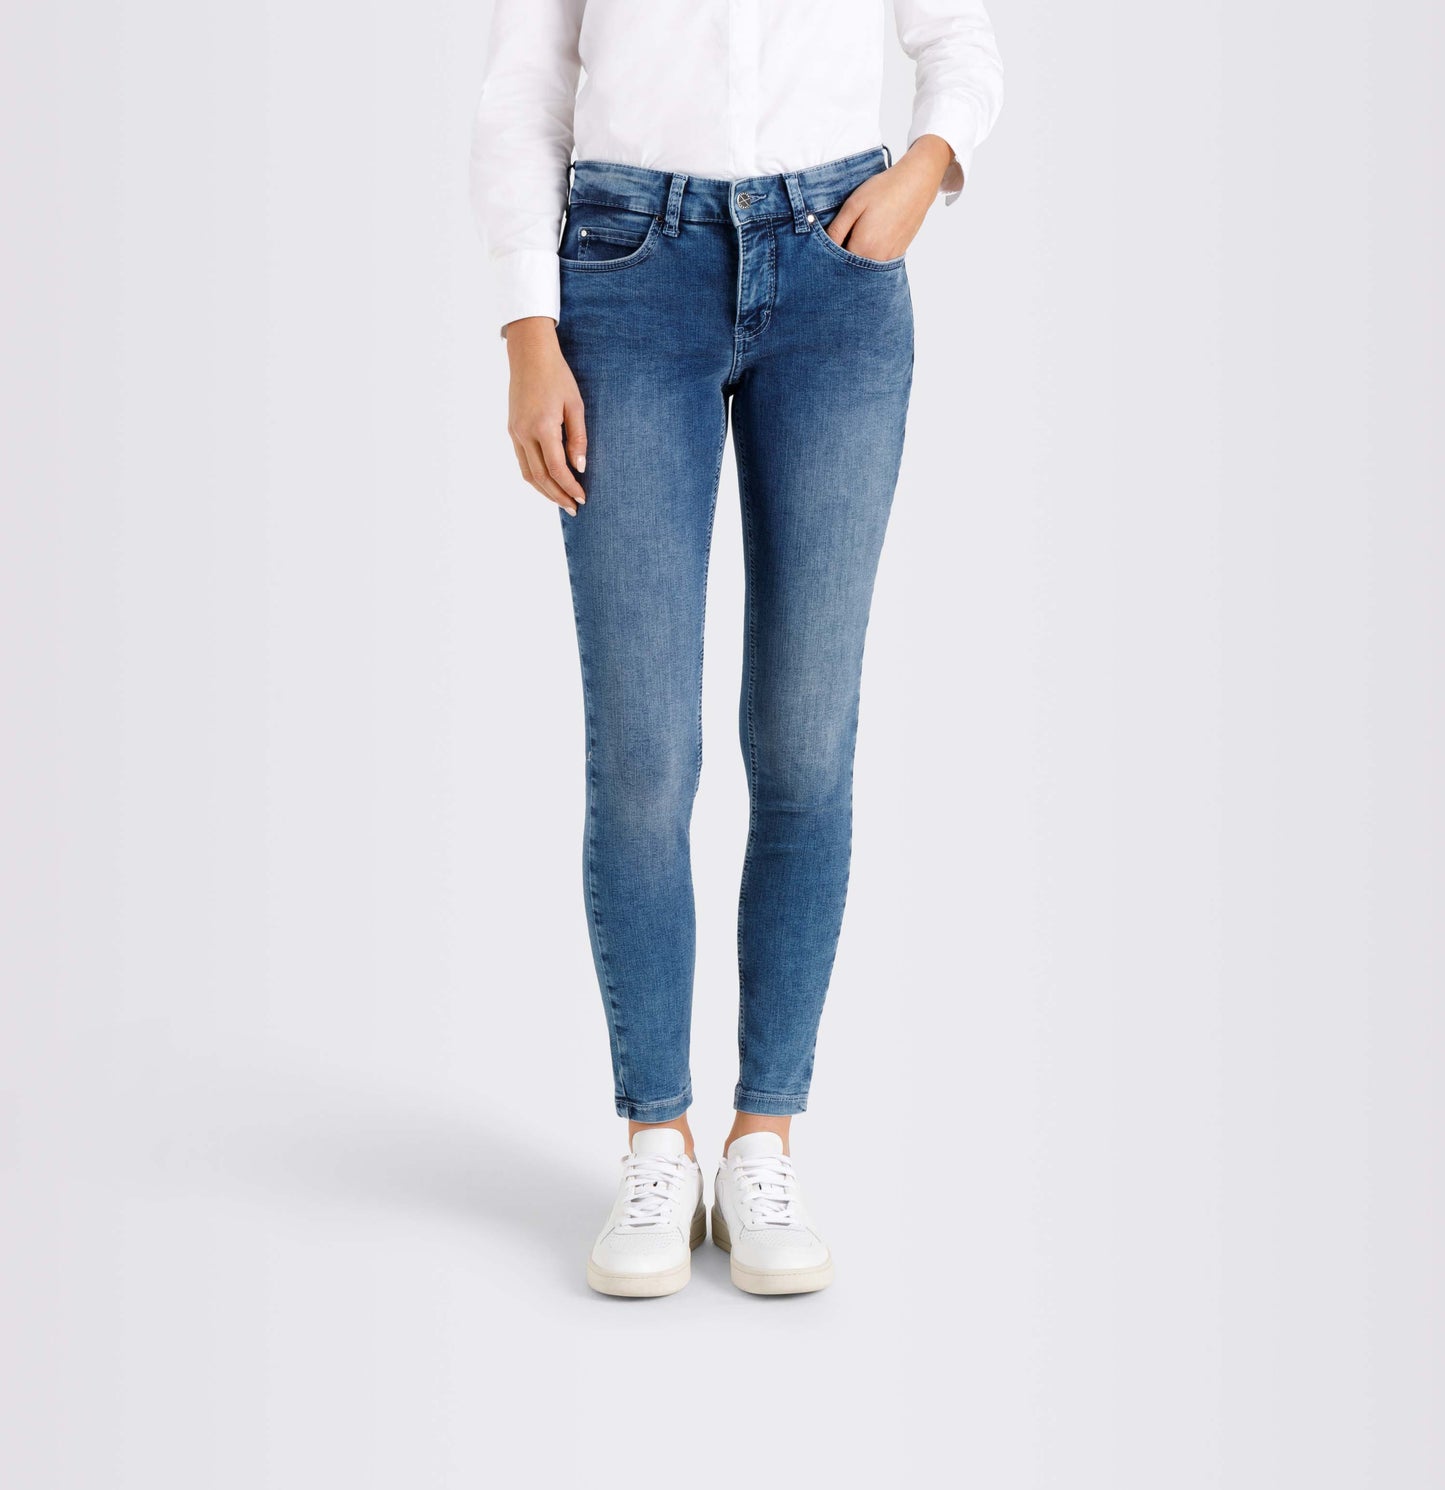 Dream Skinny Authentic Jeans - Authentic Summer Blue Wash